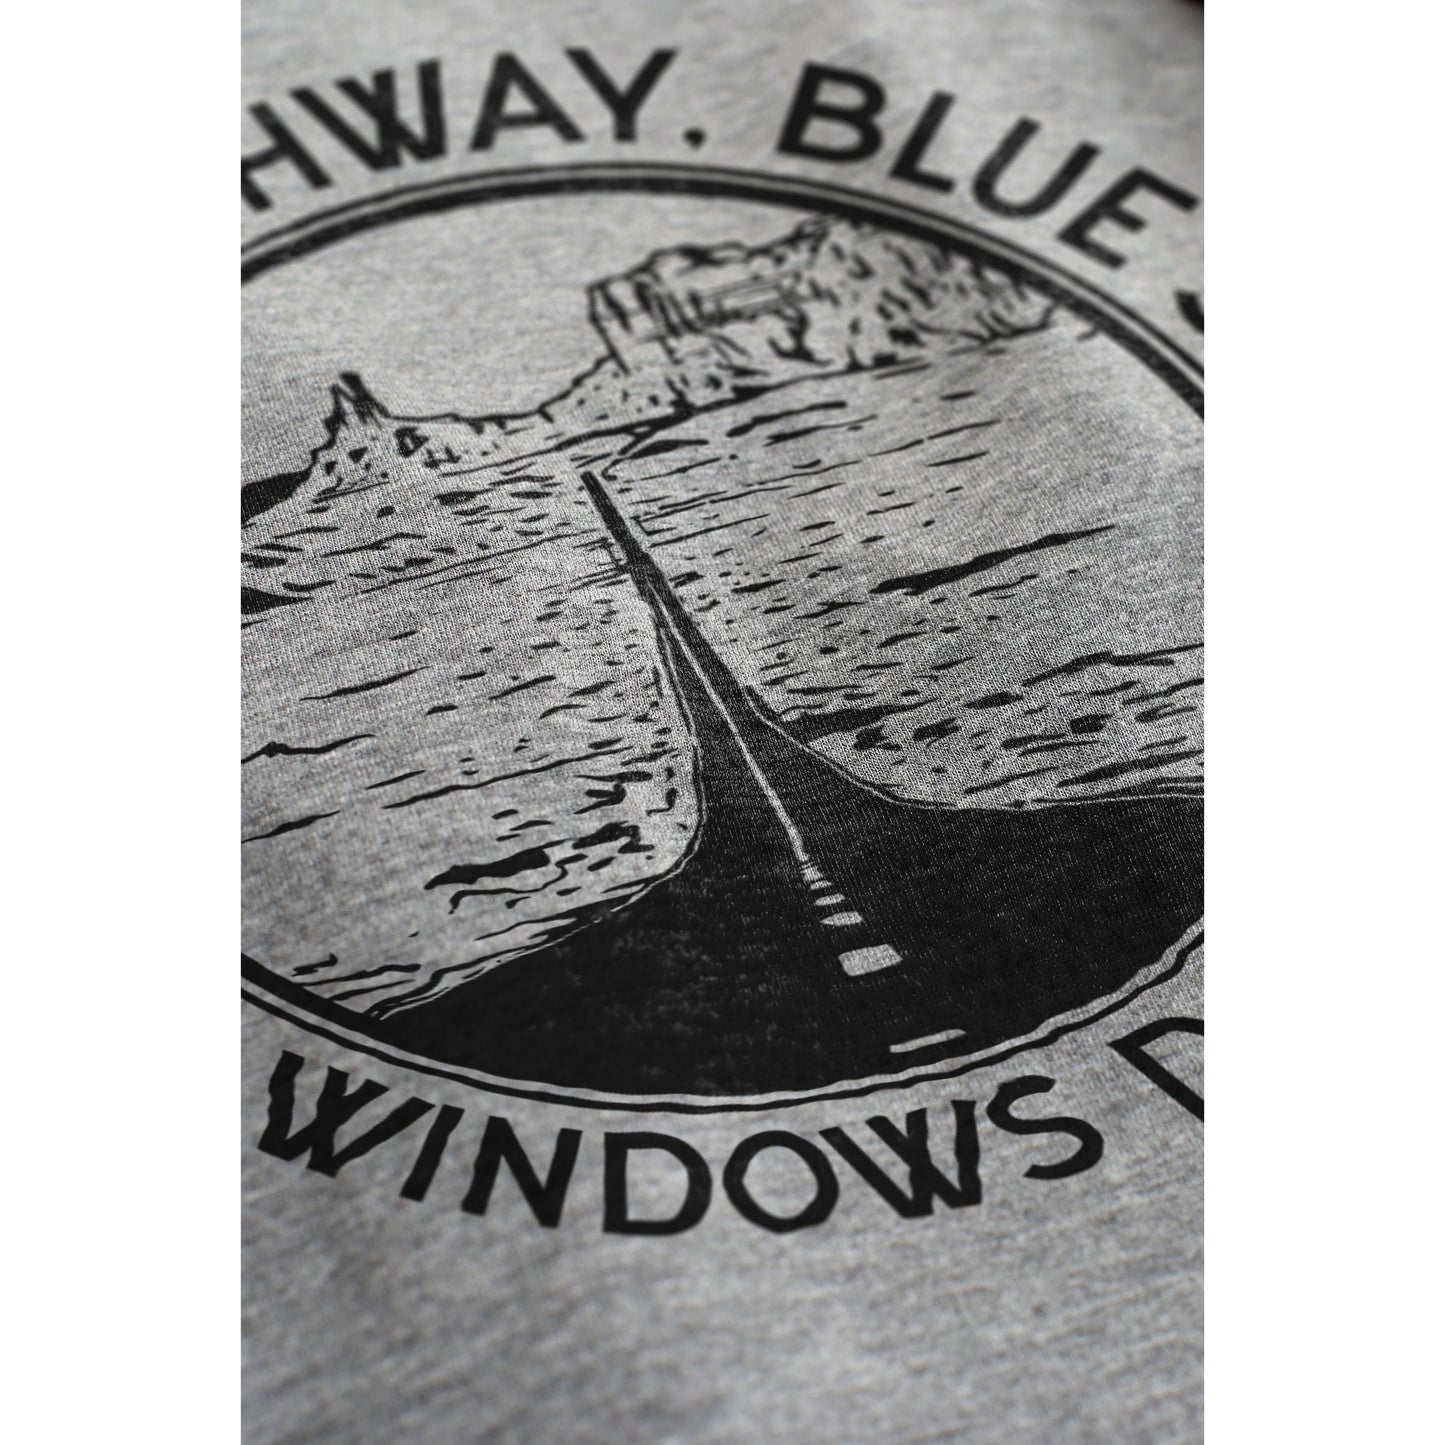 Just The Highway, The Blue Skies, Windows Down - thread tank | Stories you can wear.